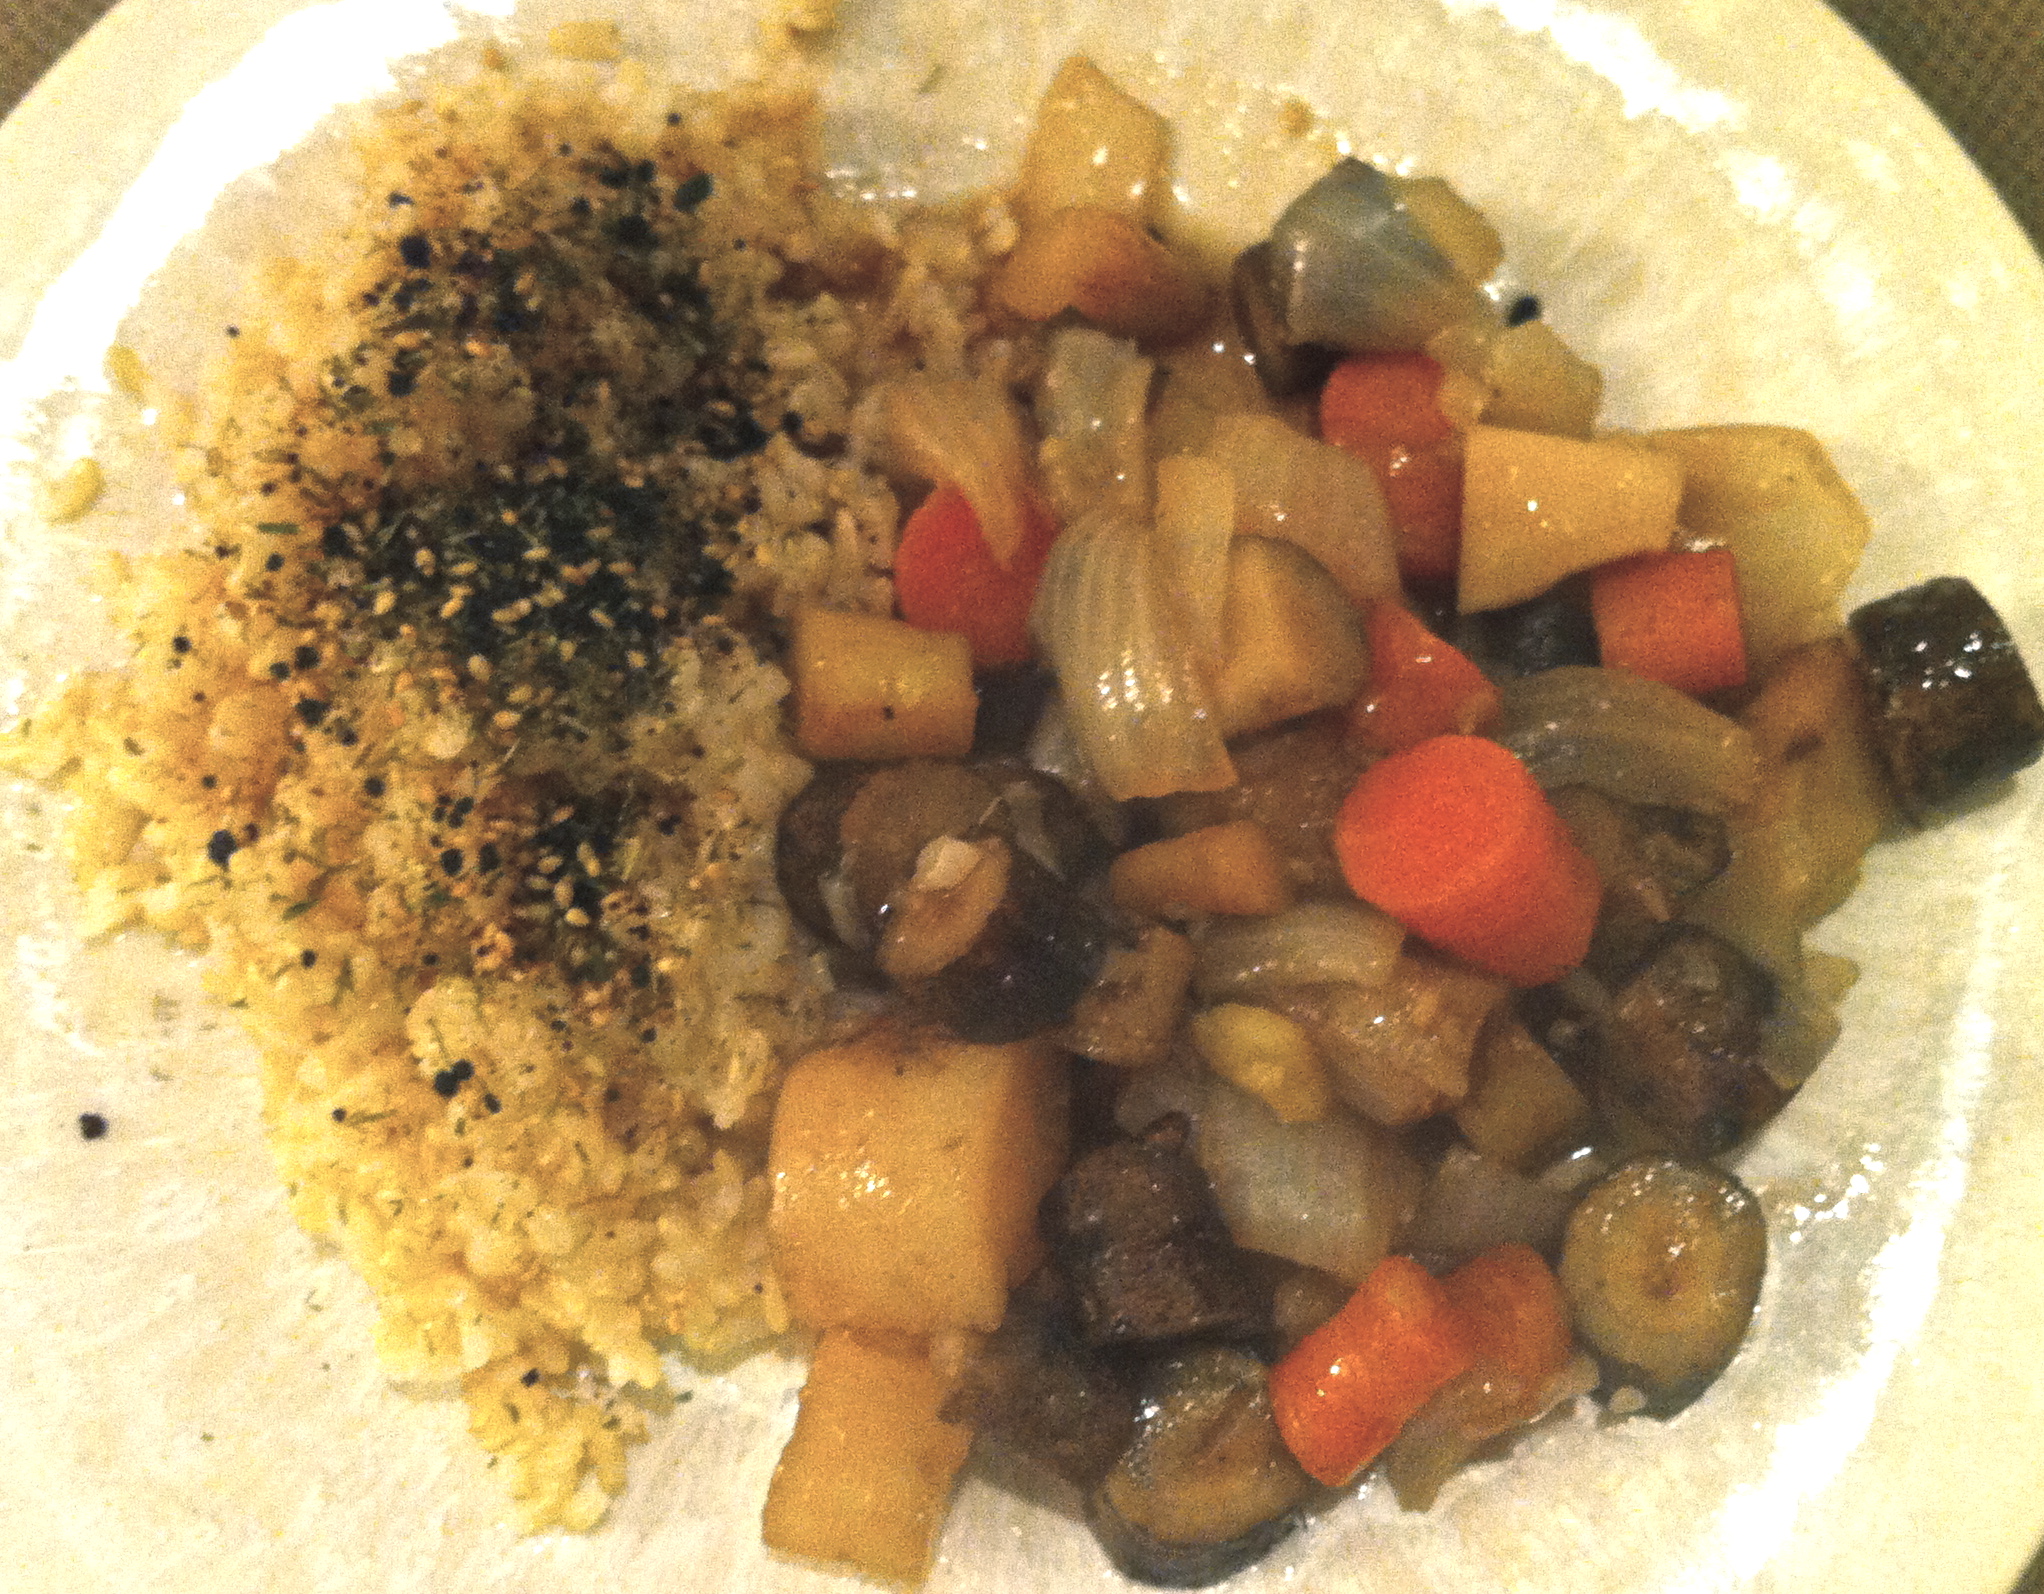 This dinner of brown rice and nishime vegetables is the perfect macrobiotic and vegan meal.